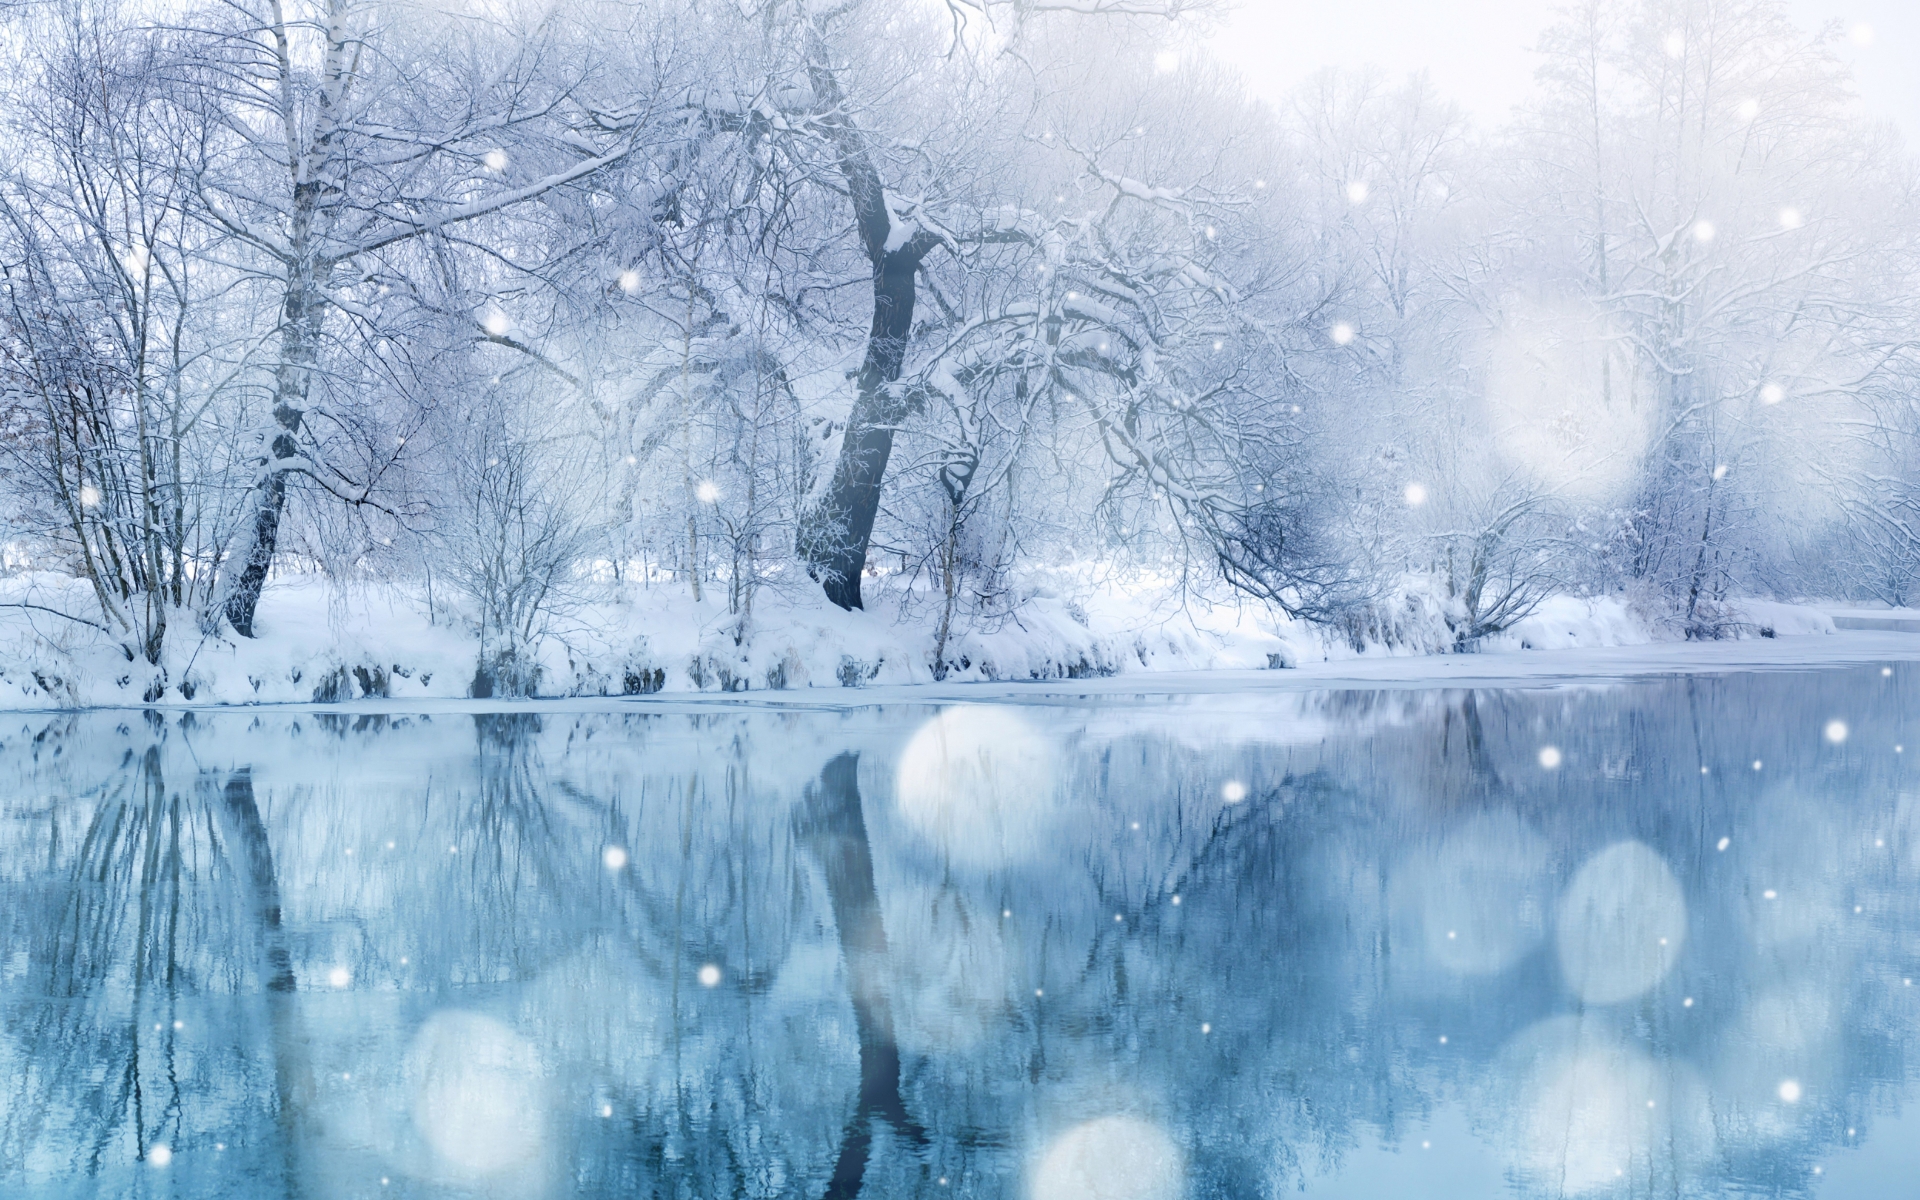 nature, Landscapes, Lakes, Rivers, Water, Reflection, Trees, Forest, Shore, Winter, Snow, Snowing, Flakes, Drops Wallpaper